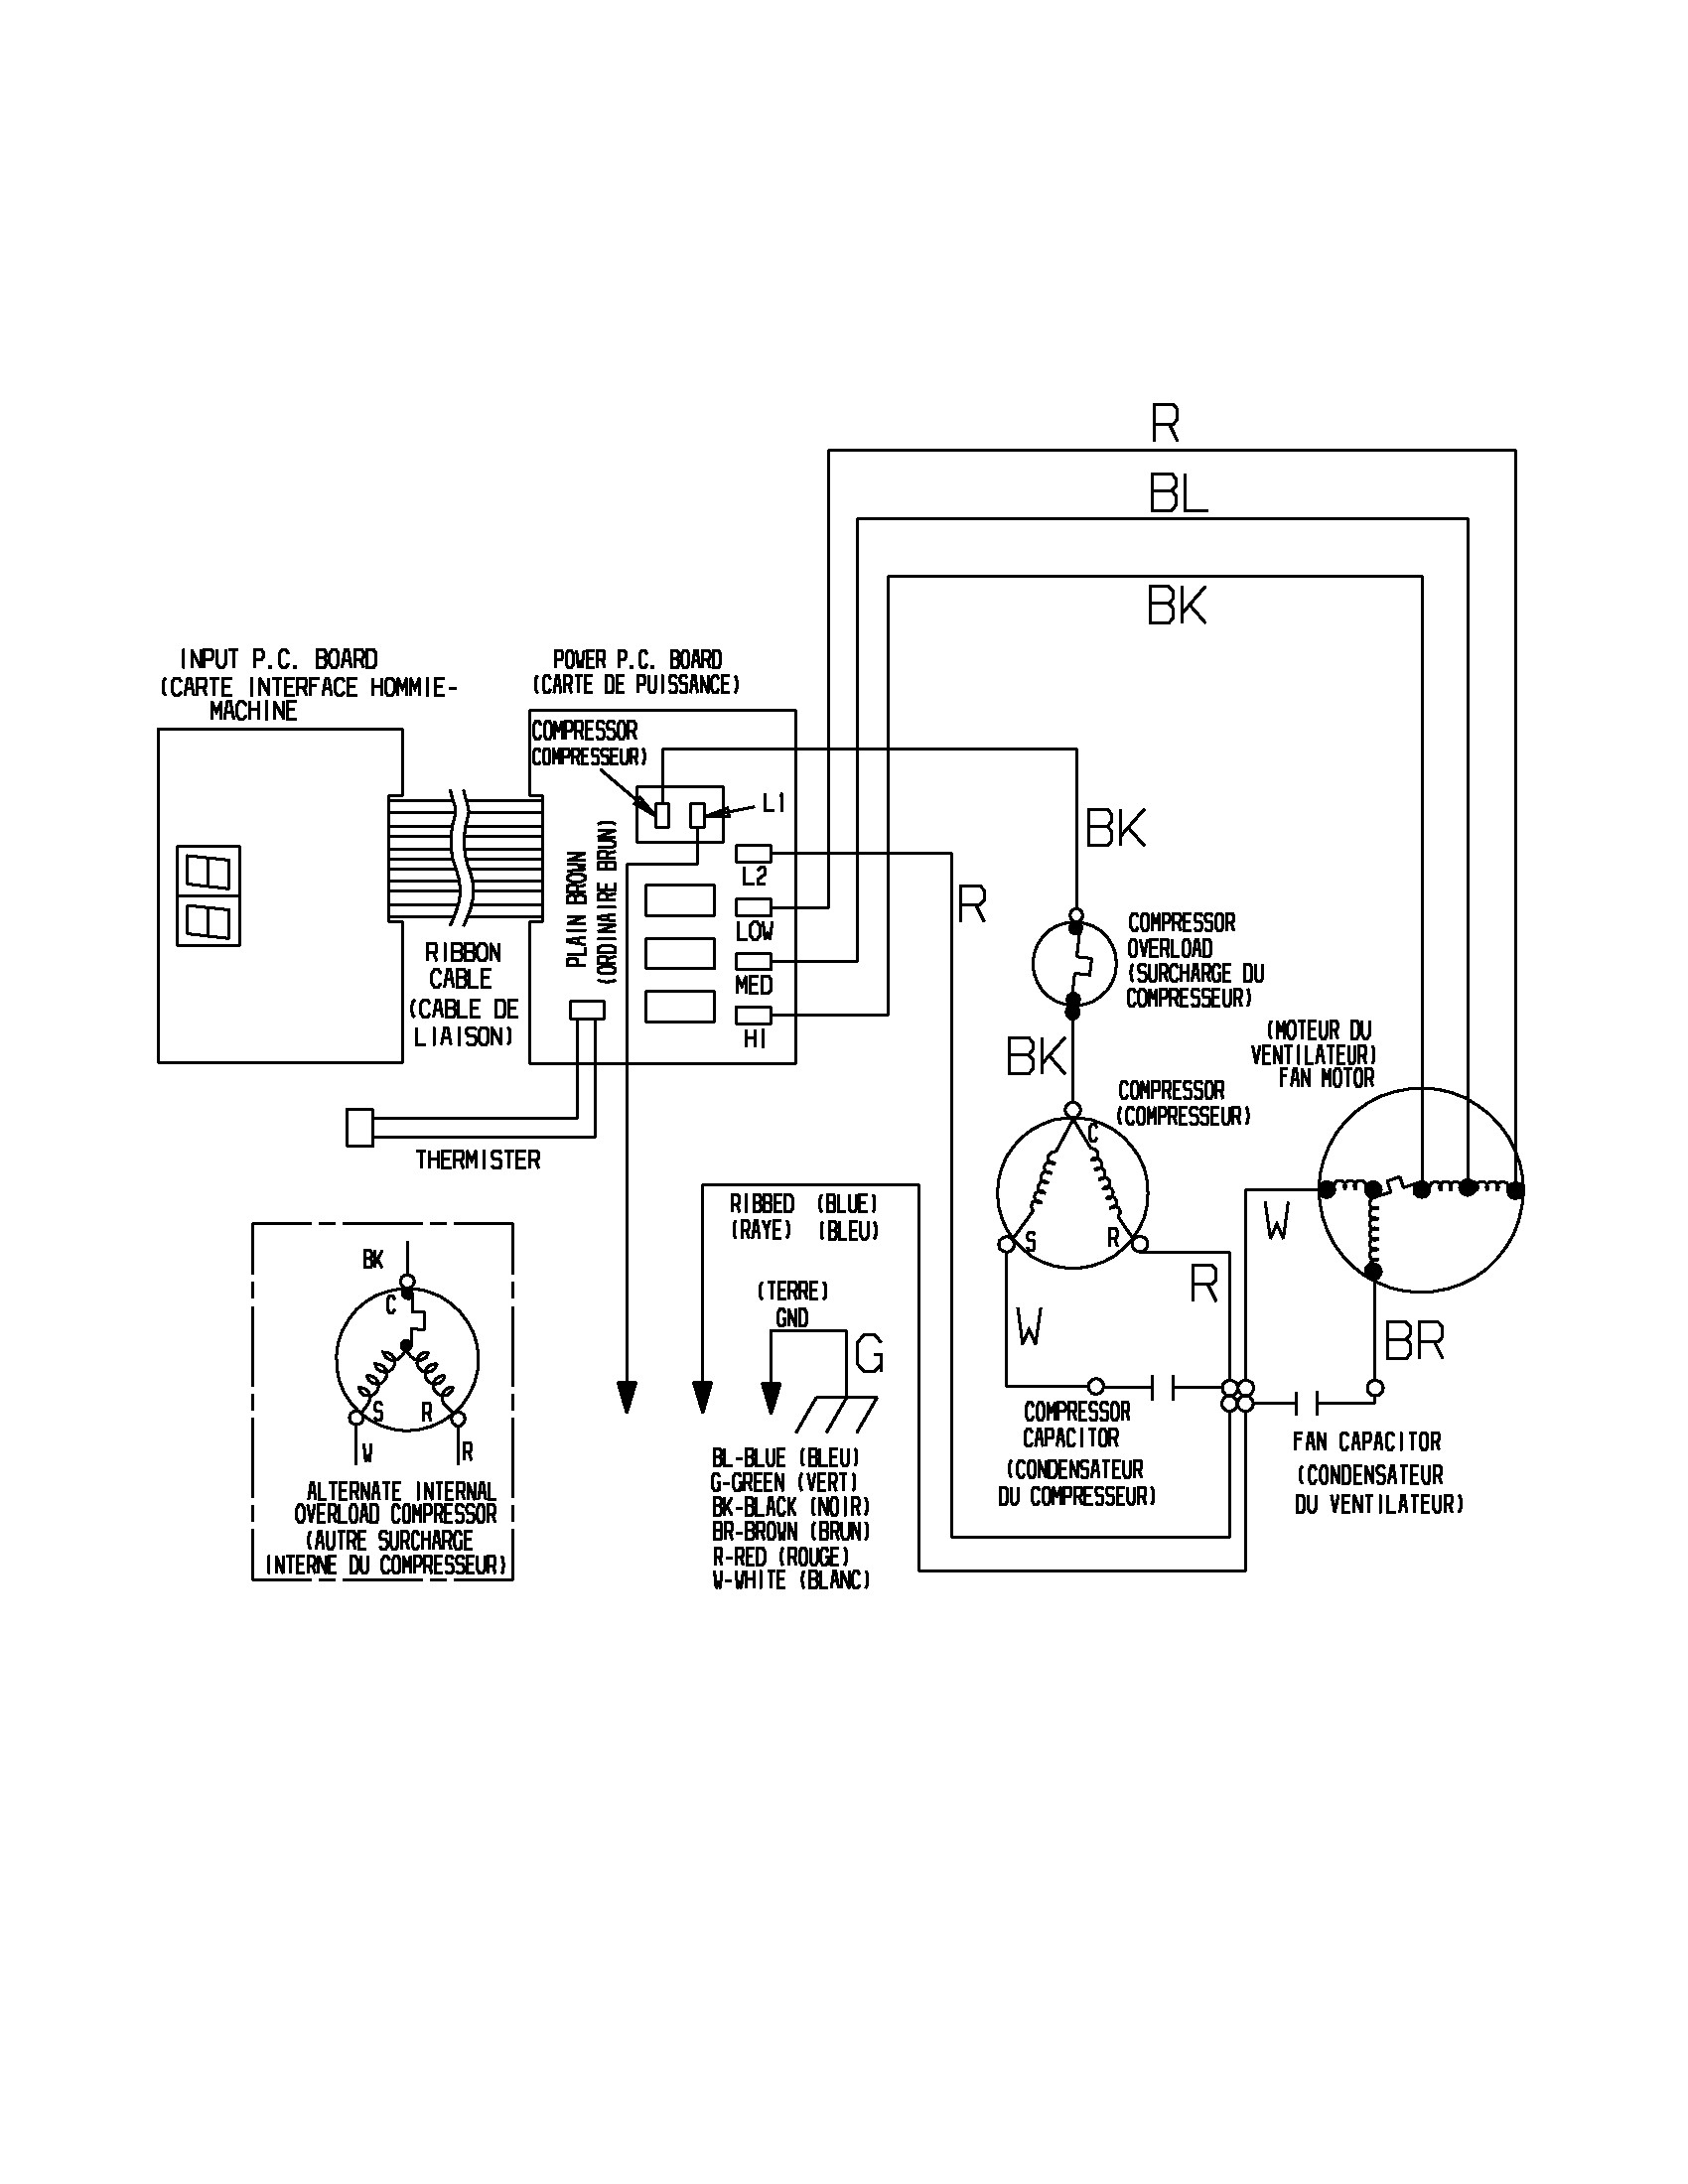 Wiring Diagram For Central Ac | Manual E-Books - Air Conditioner Wiring Diagram Capacitor